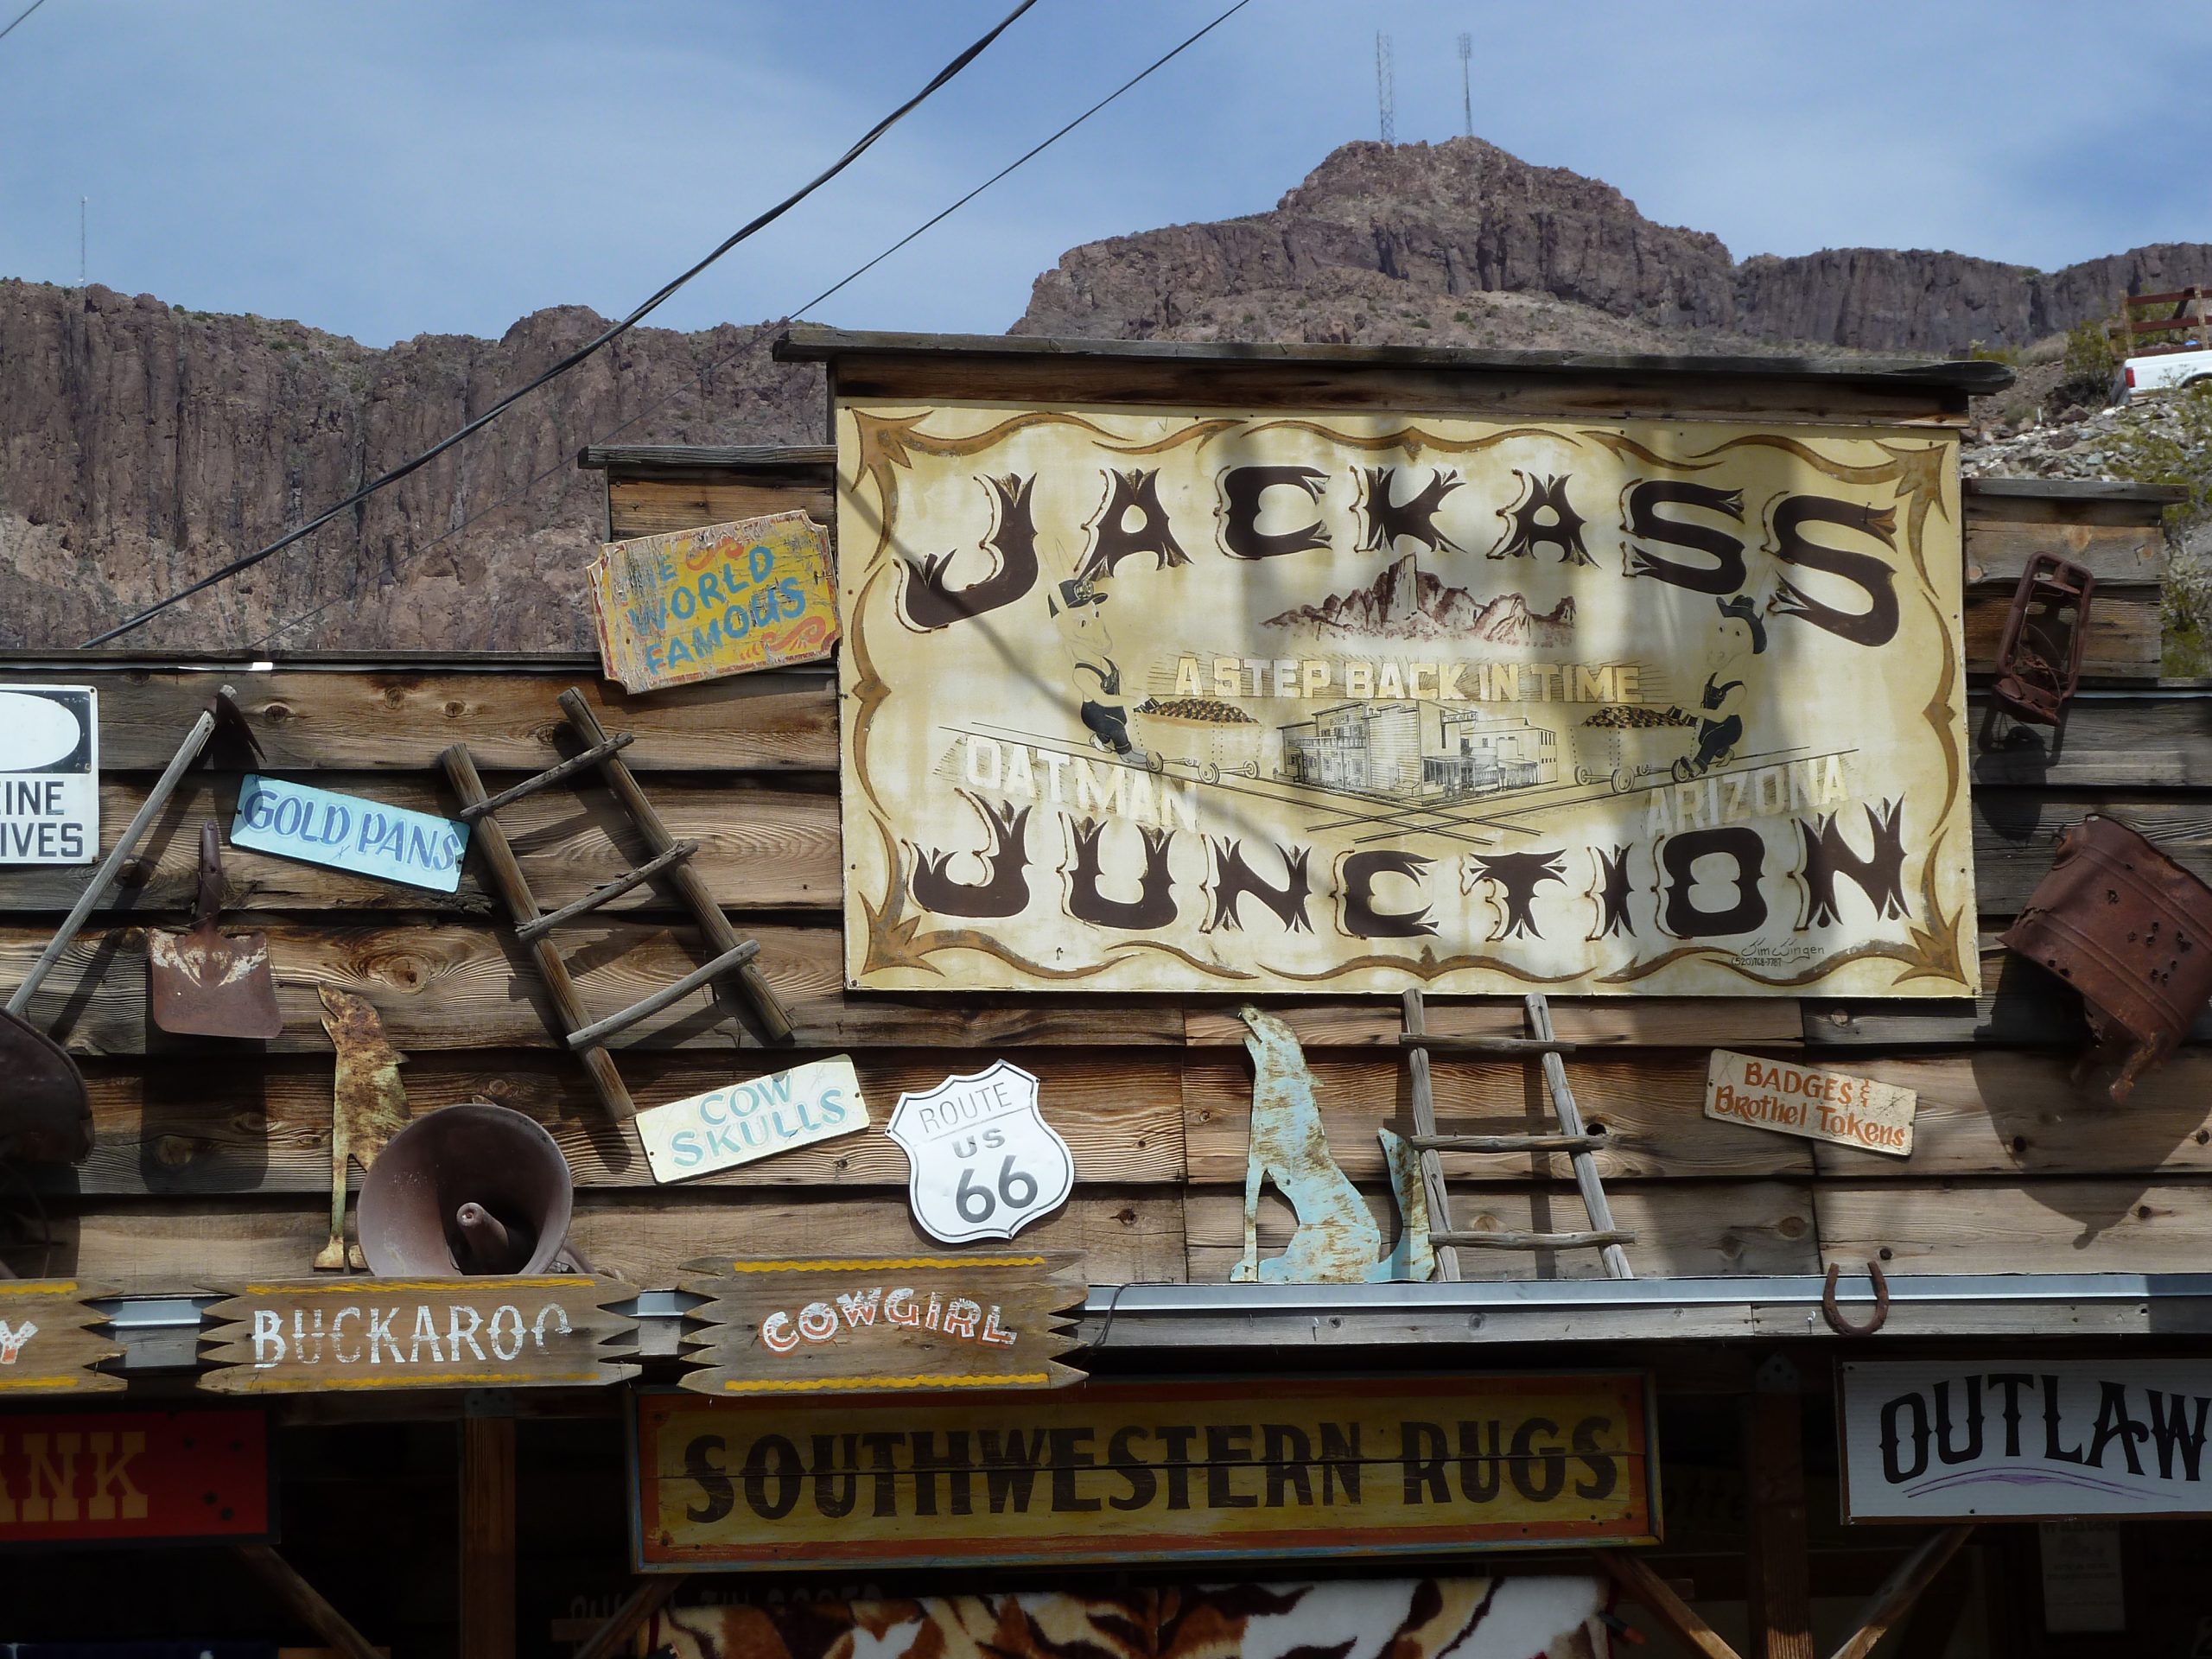 Arizona Ghost Towns and Wild-West Day Trip from Las Vegas